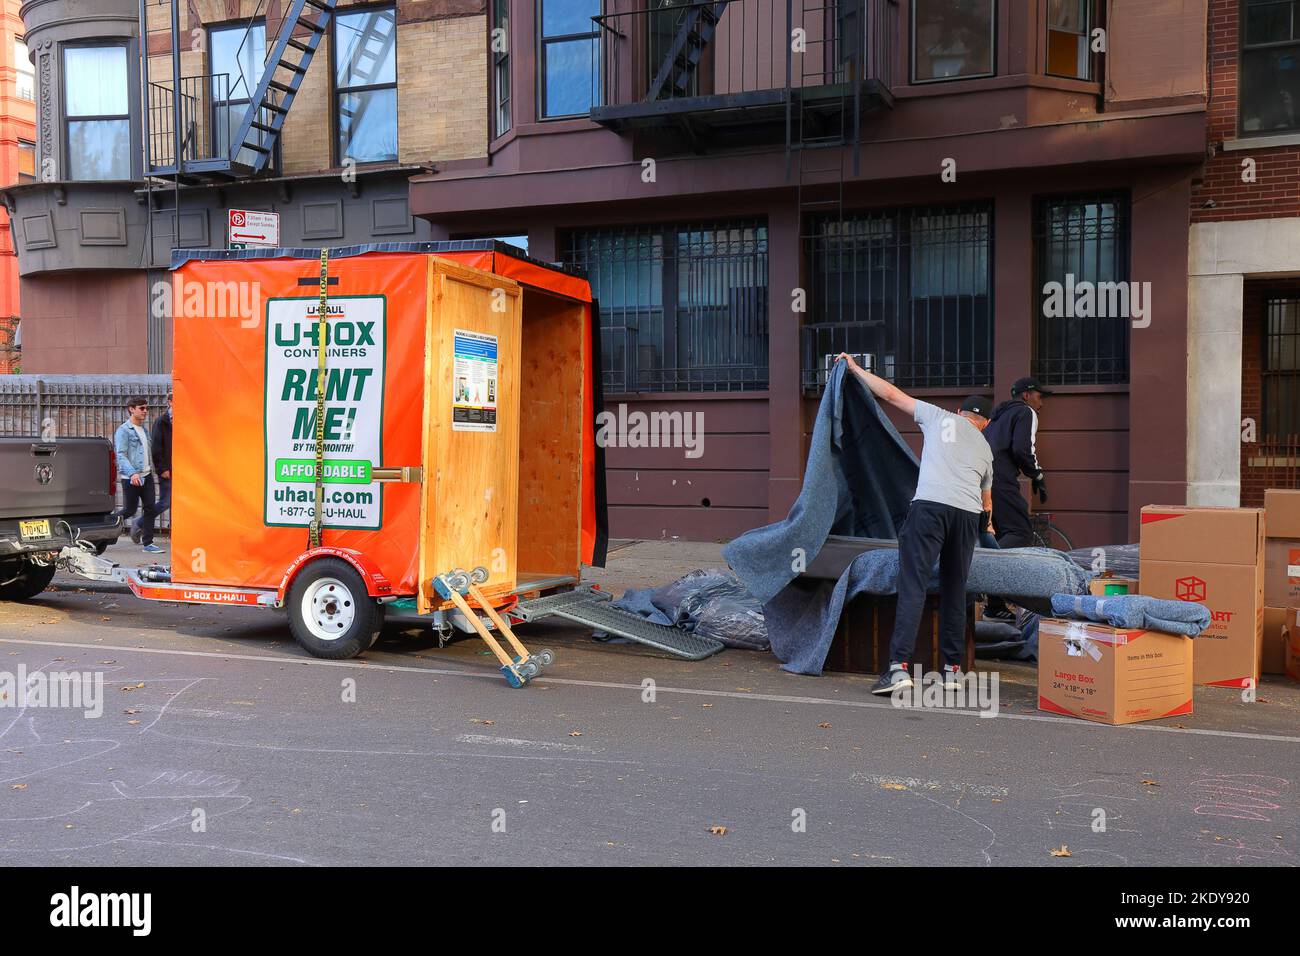 People packing a U-Haul U-Box rental storage container outside an apartment building. Stock Photo